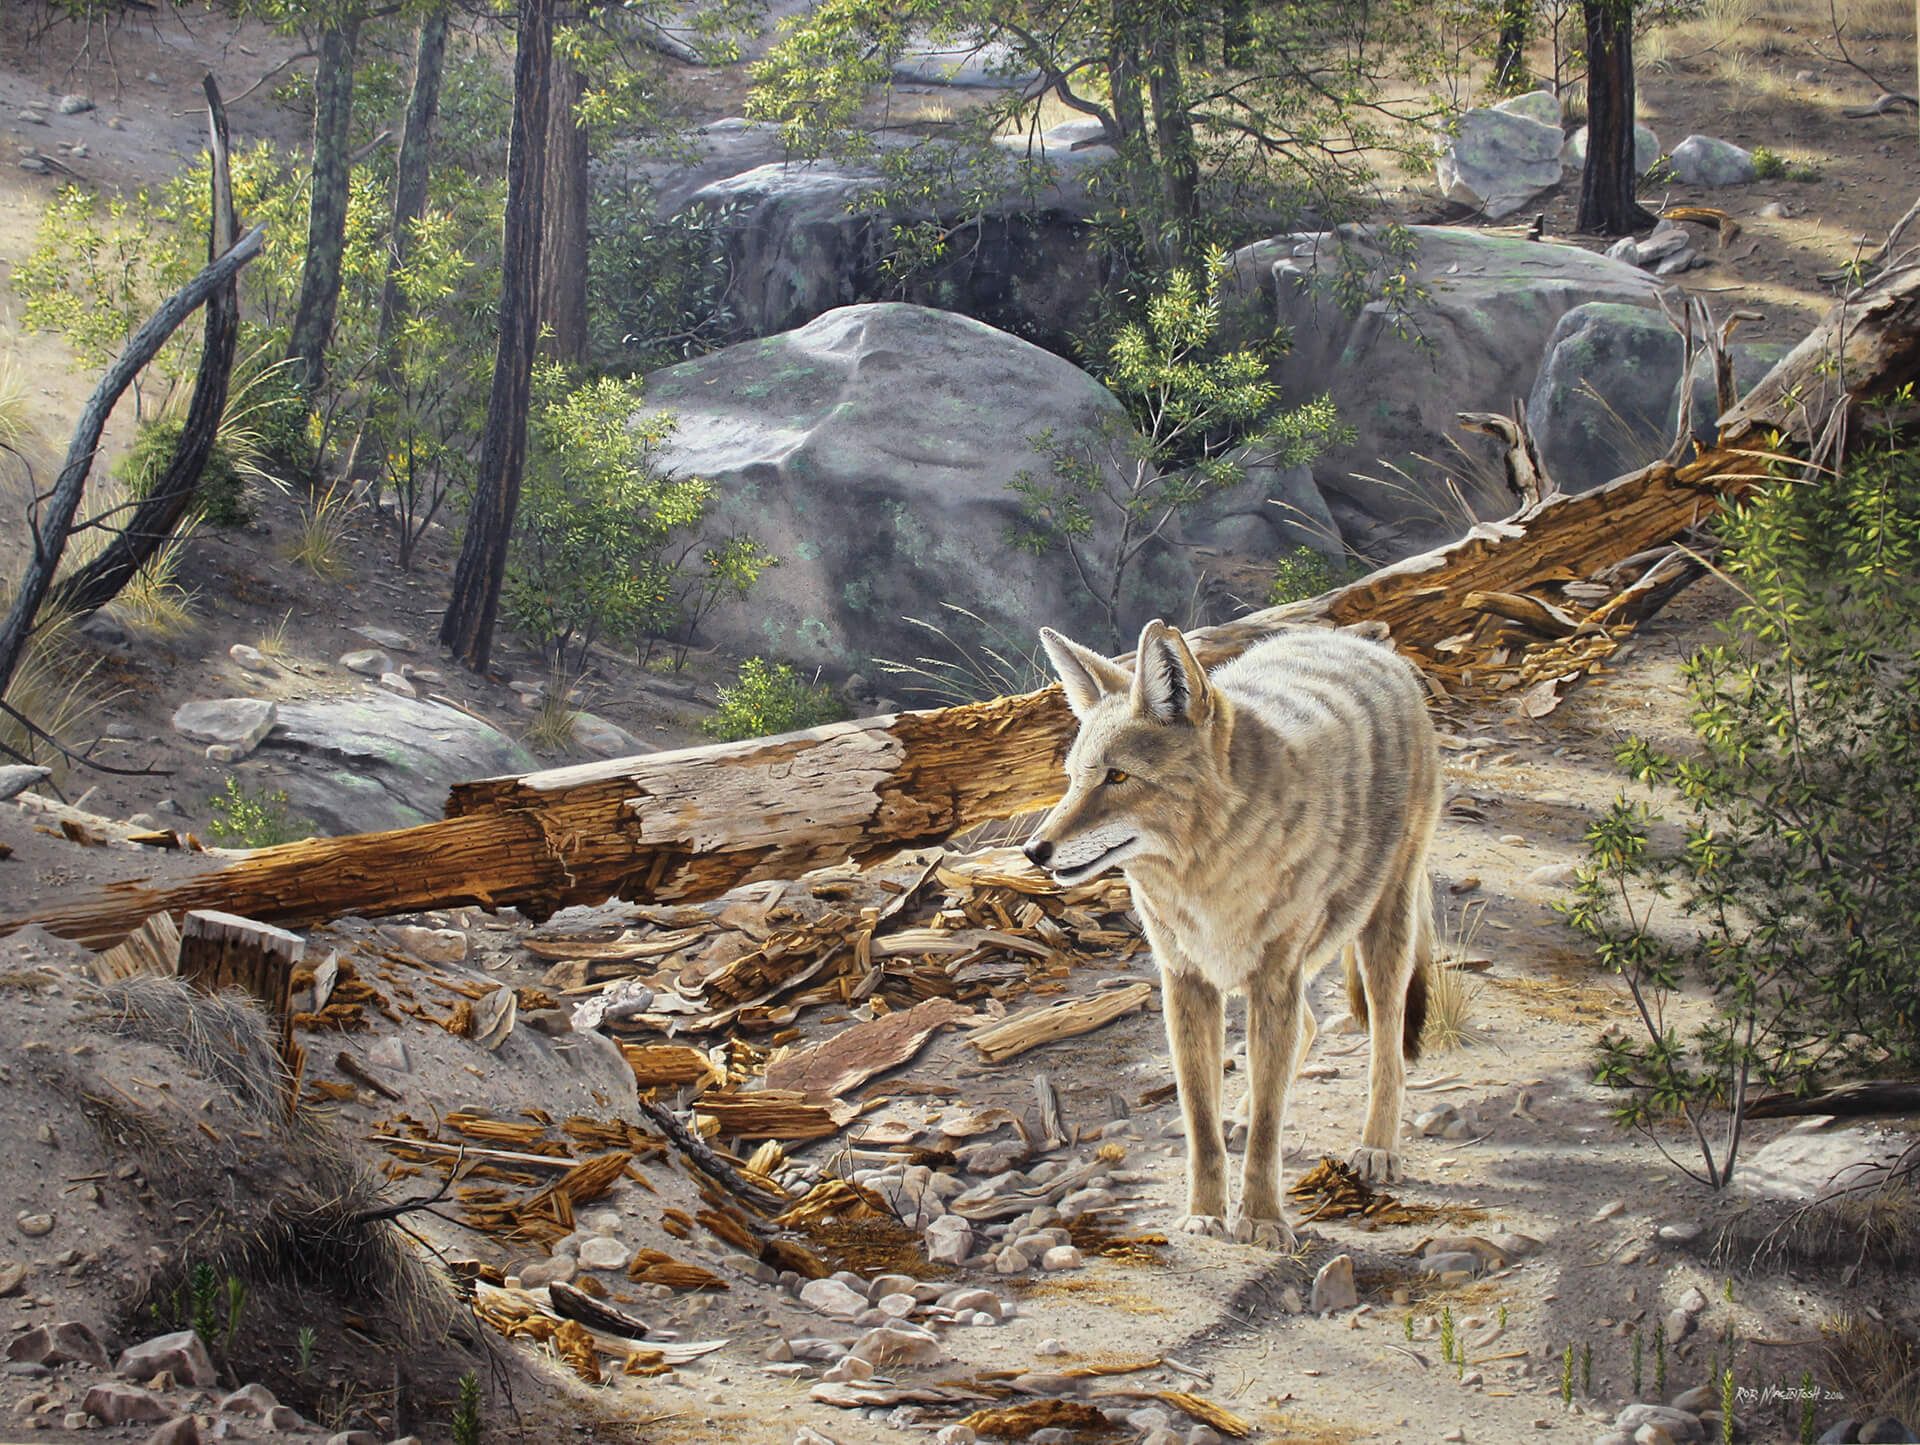 Photorealistic painting of a coyote prowling through woods